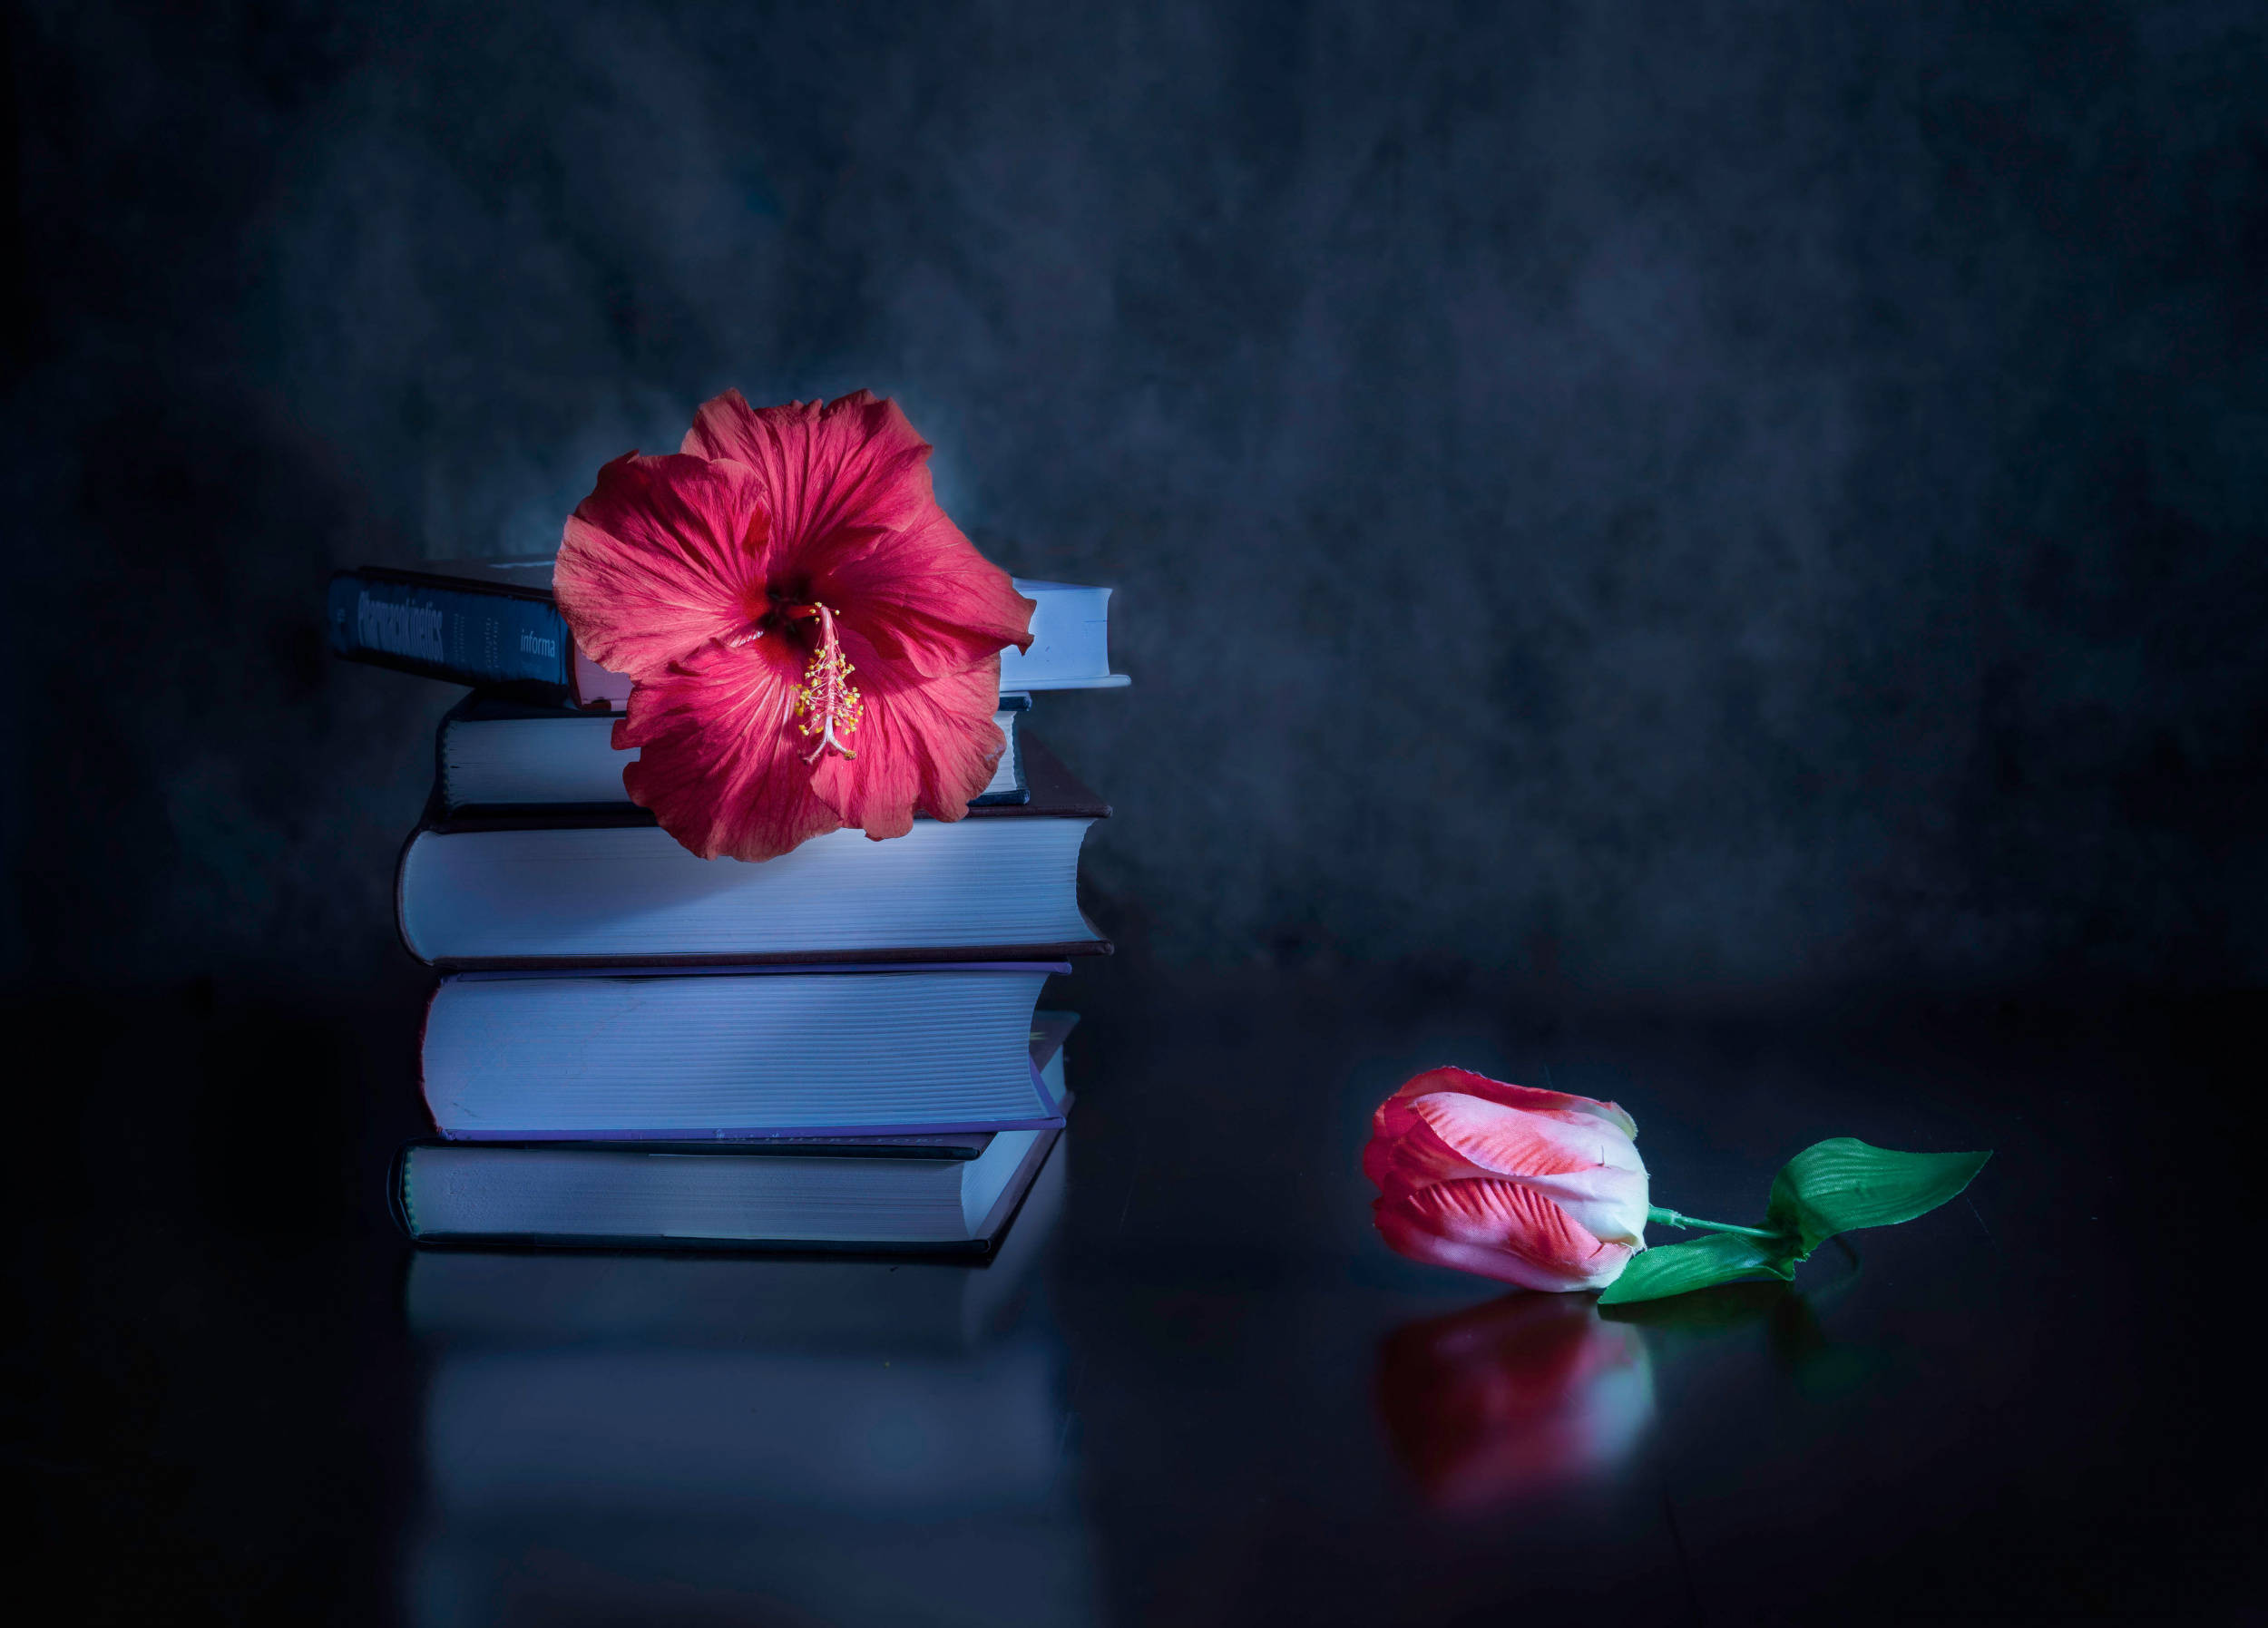 Download Dark Pink Floral And Books Wallpaper